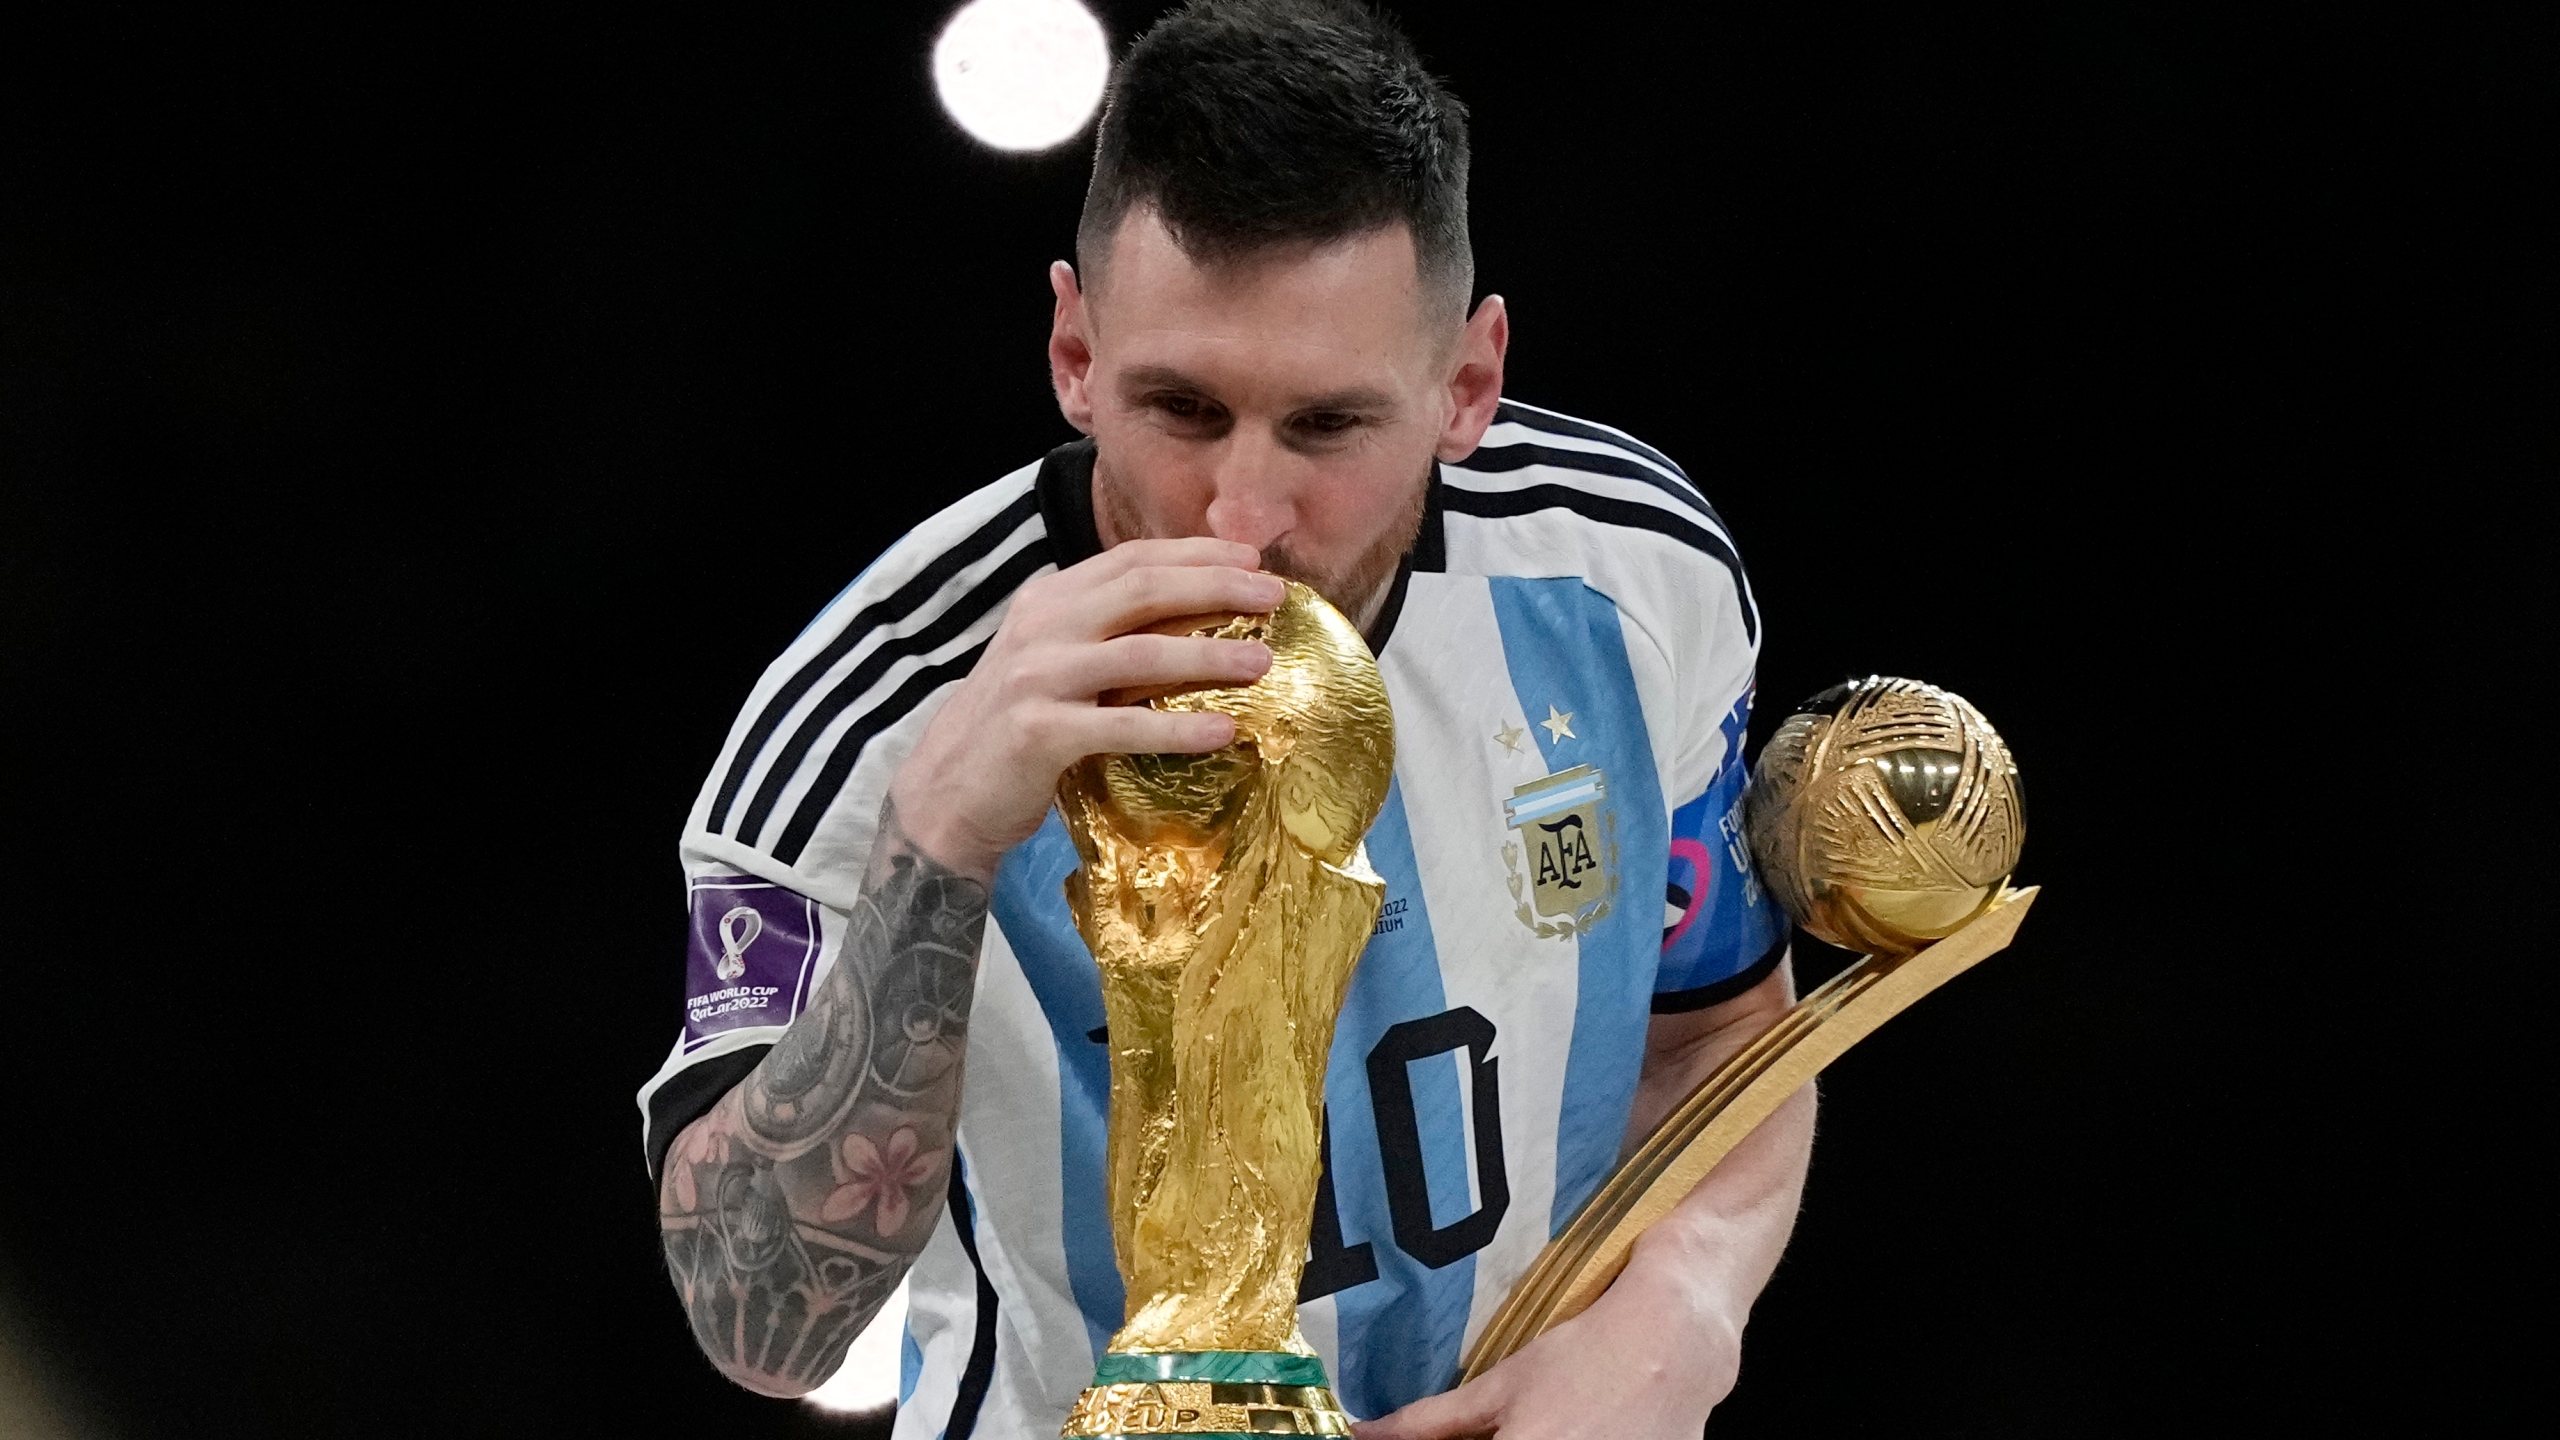 Messi wins World Cup to push claim to be soccer's GOAT